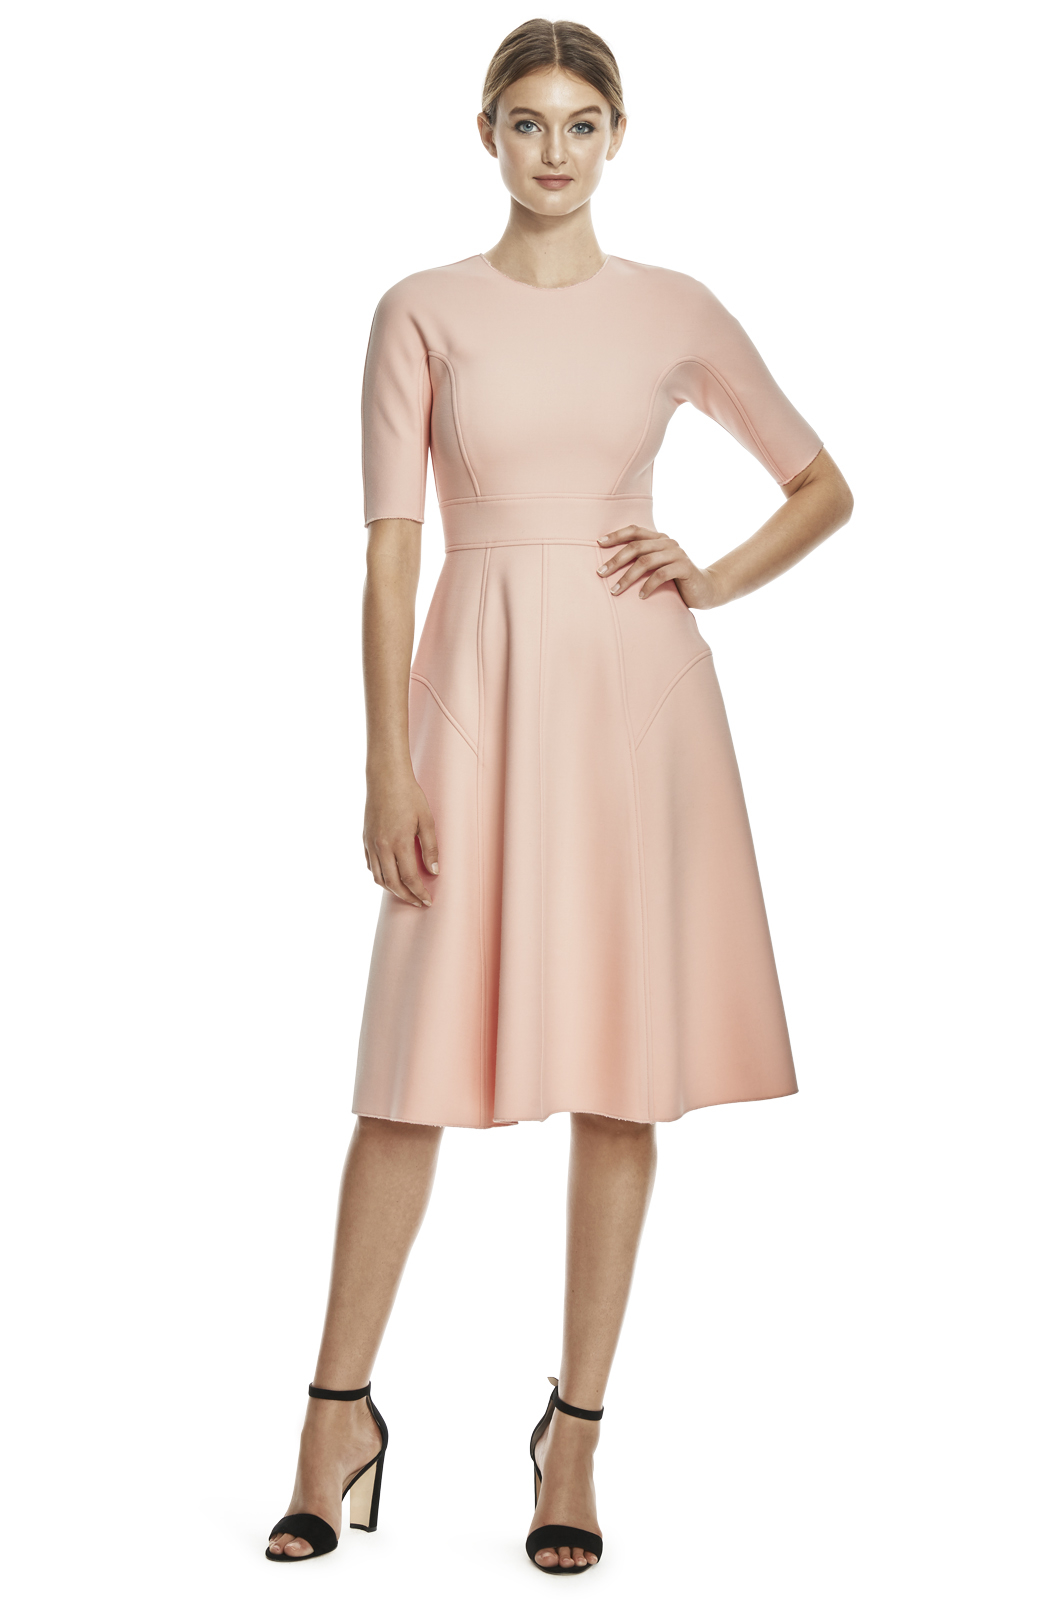 lela-rose-blush-double-faced-twill-cap-sleeve-dress-pink-product-2-239696646-normal.jpeg